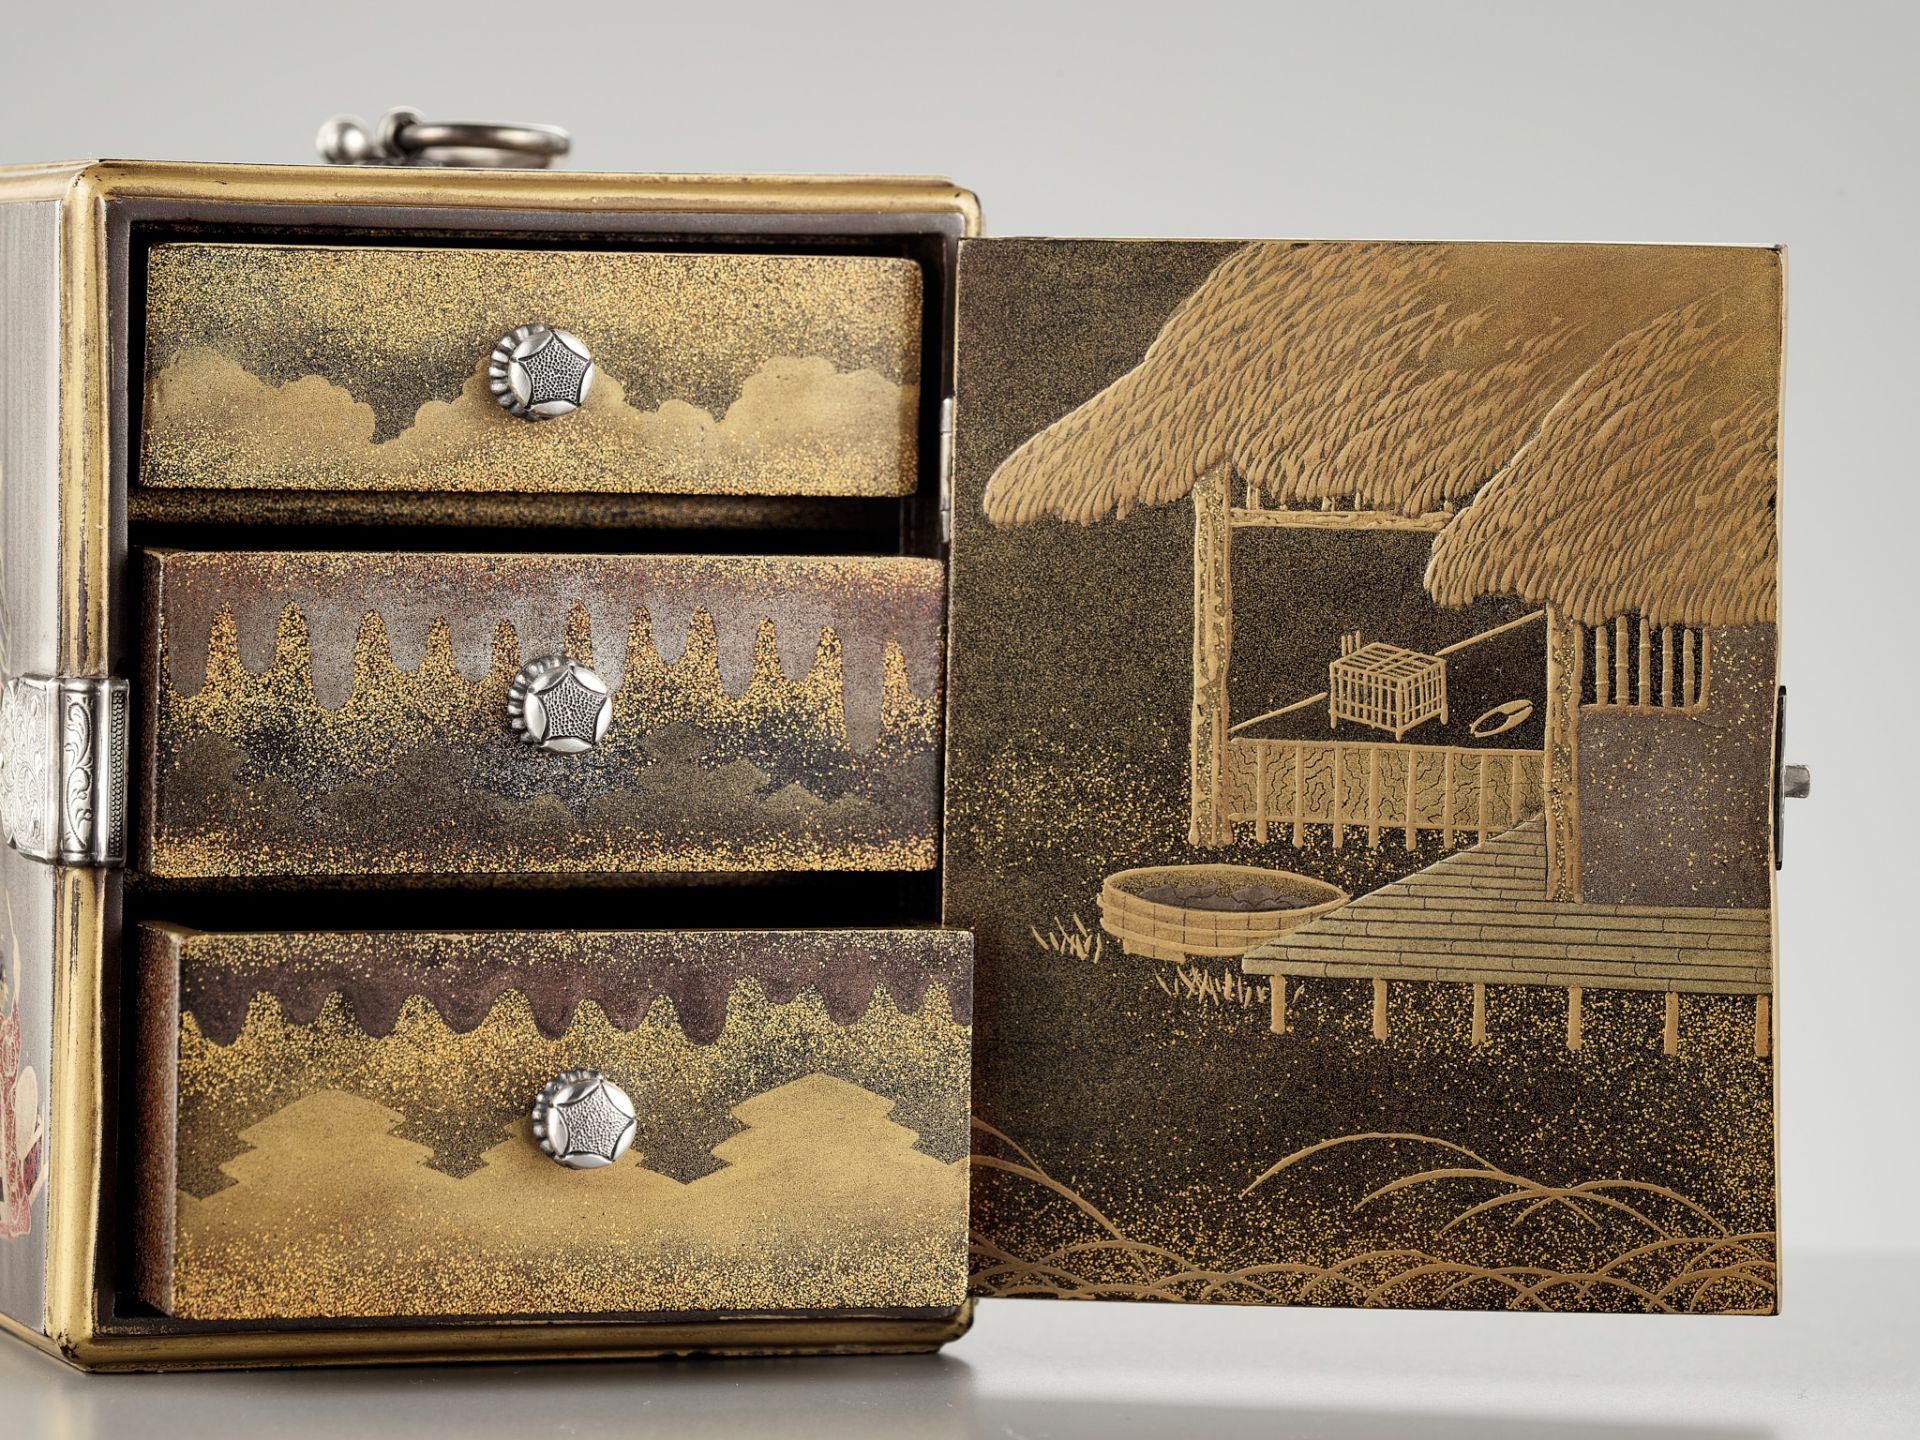 A LACQUER MINIATURE KODANSU (CABINET) WITH SCENES FROM THE TALE OF THE TONGUE-CUT SPARROW - Image 7 of 12